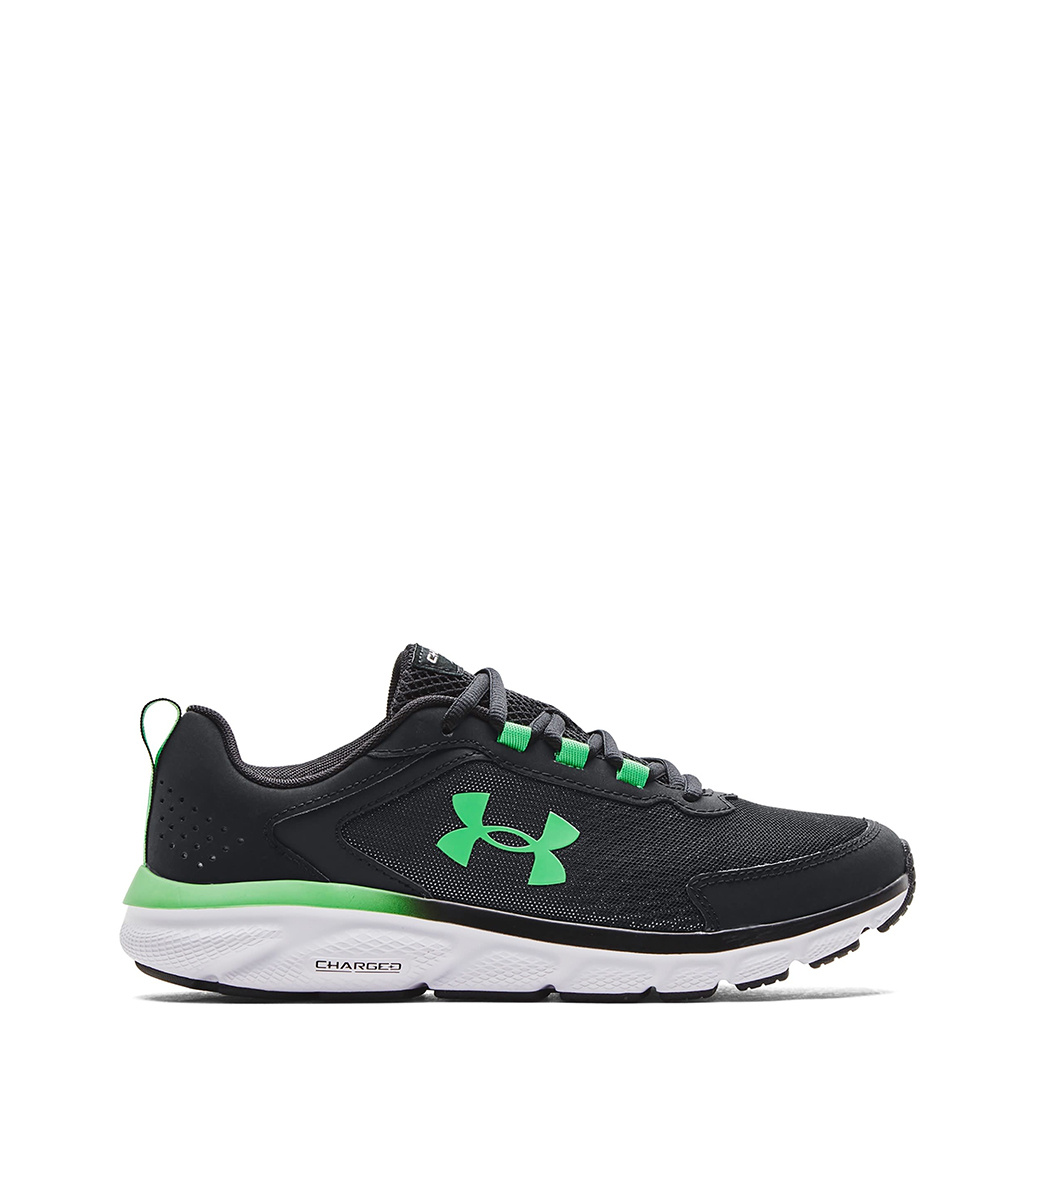 UNDER ARMOUR CHARGED ASSERT 9 BLACK / GREEN - Laura-Jo Shoes